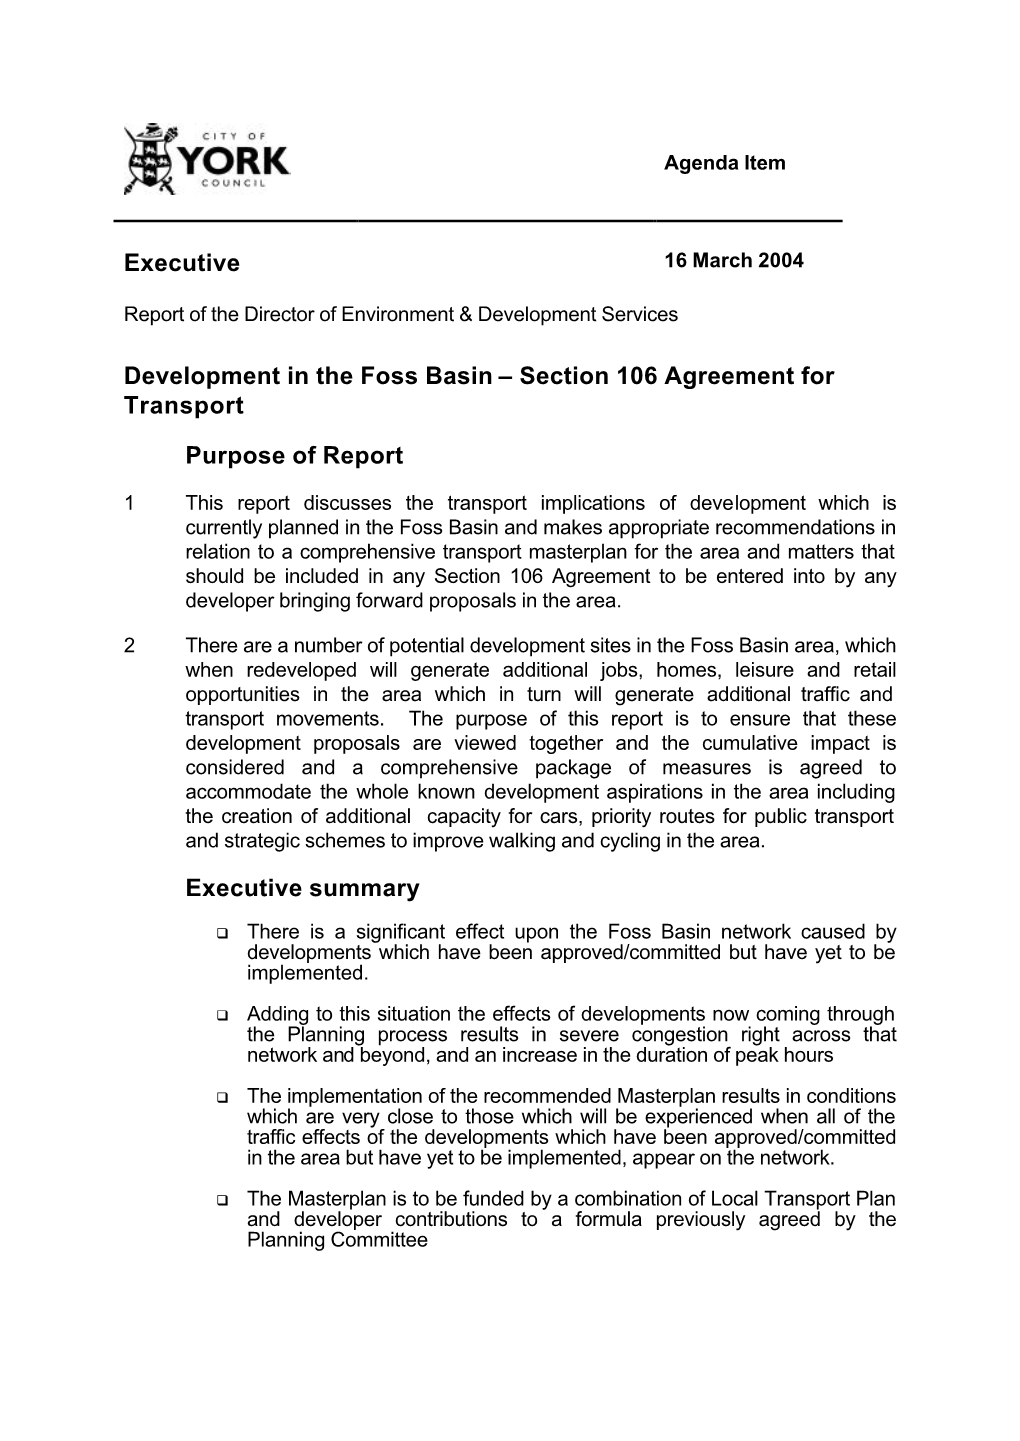 Development in the Foss Basin – Section 106 Agreement for Transport